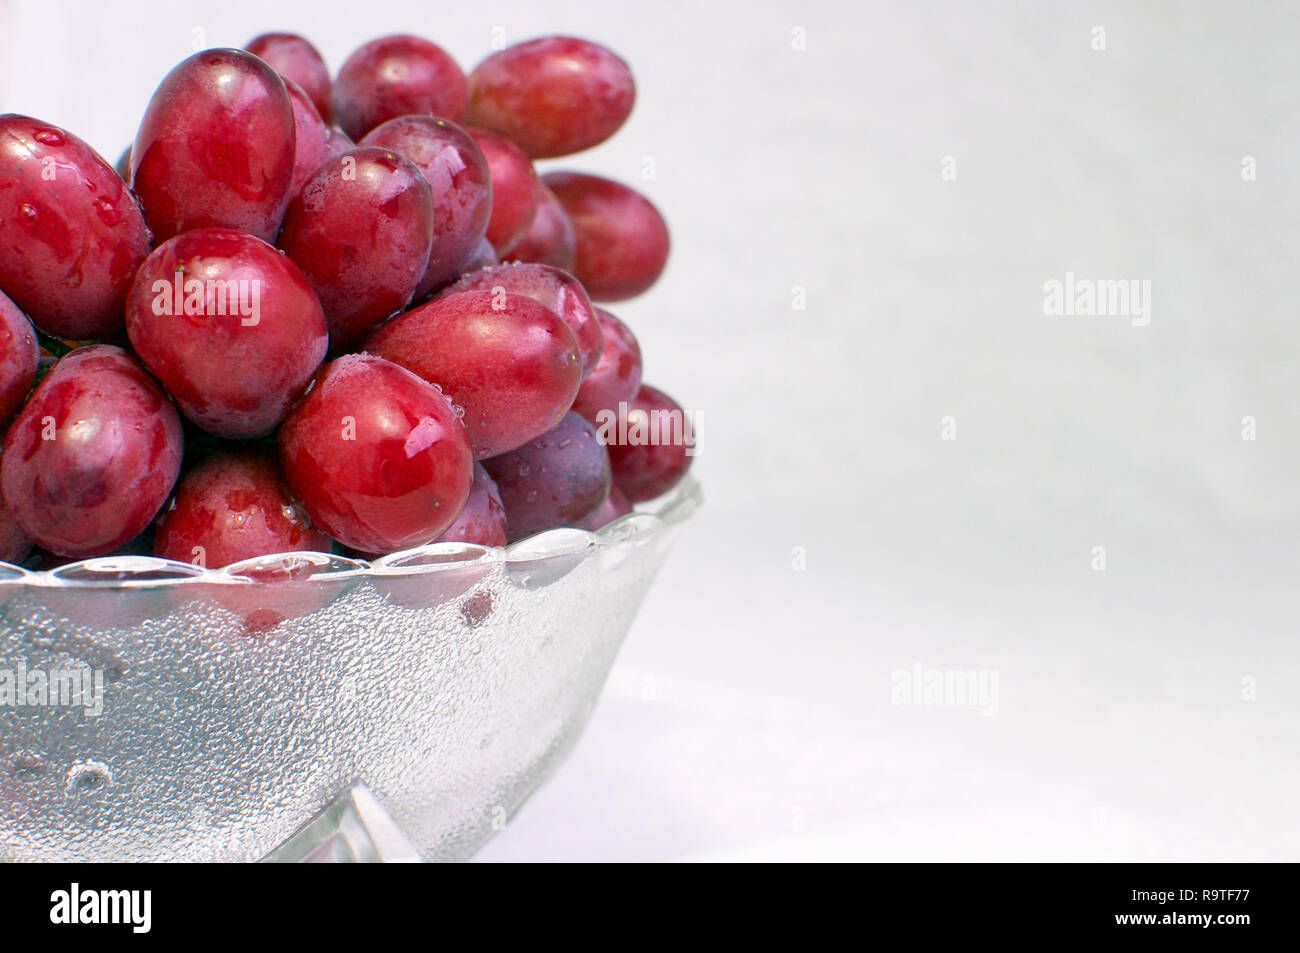 Bunch of Seedless Red Grapes (Vitis vinifera) in a Glass Bowl Offset Stock Photo